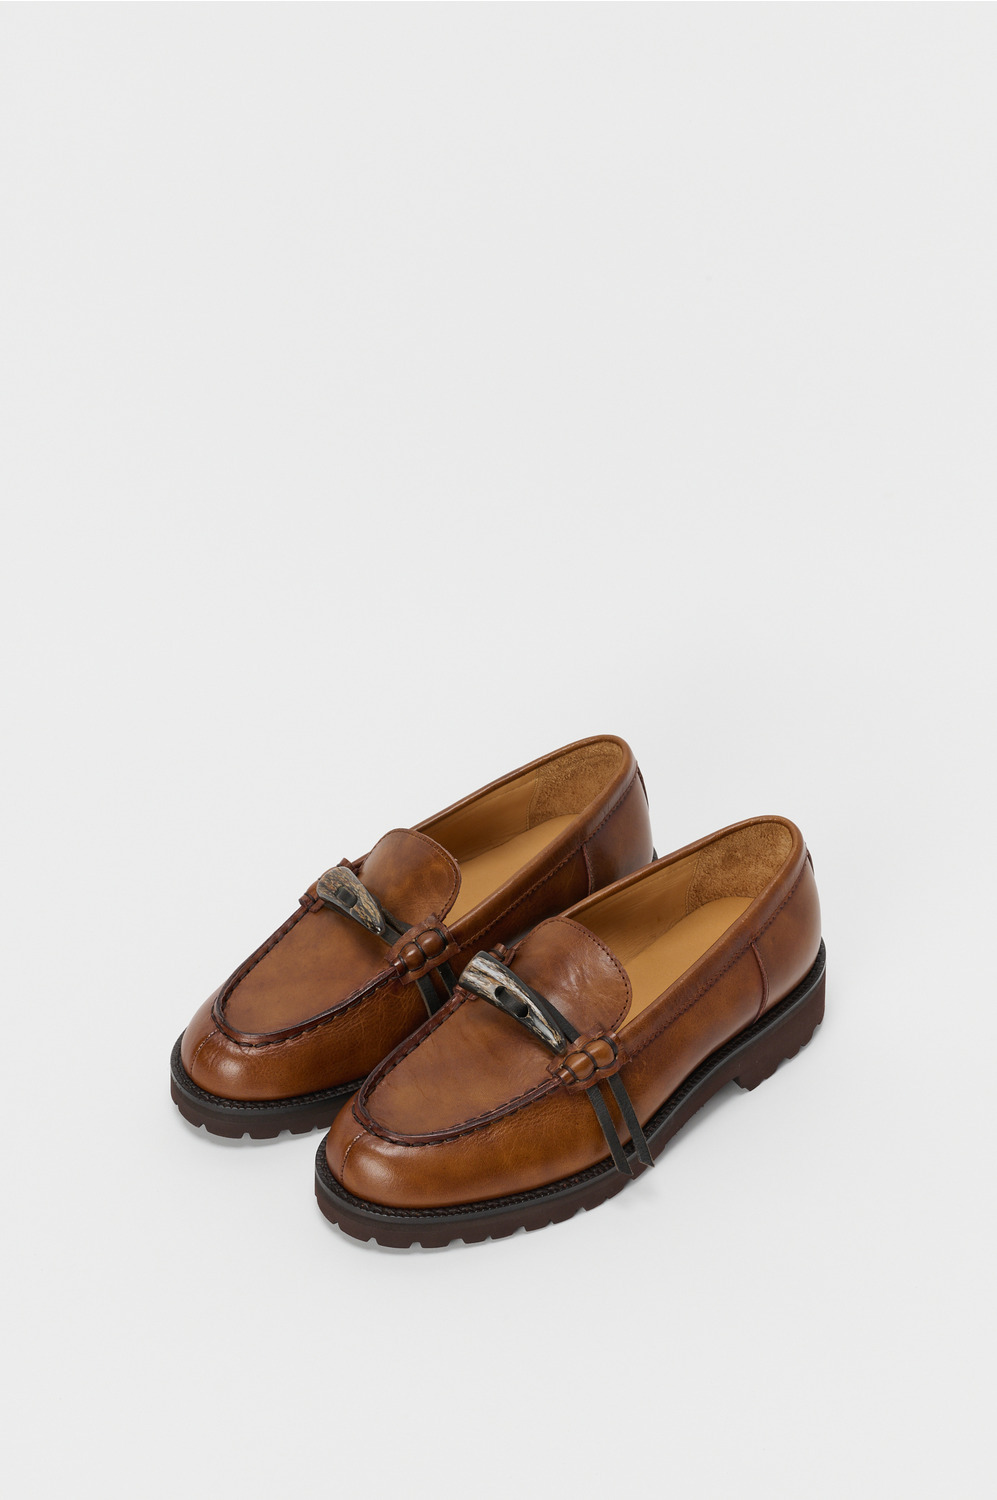 horn loafer smooth 詳細画像 brown 1